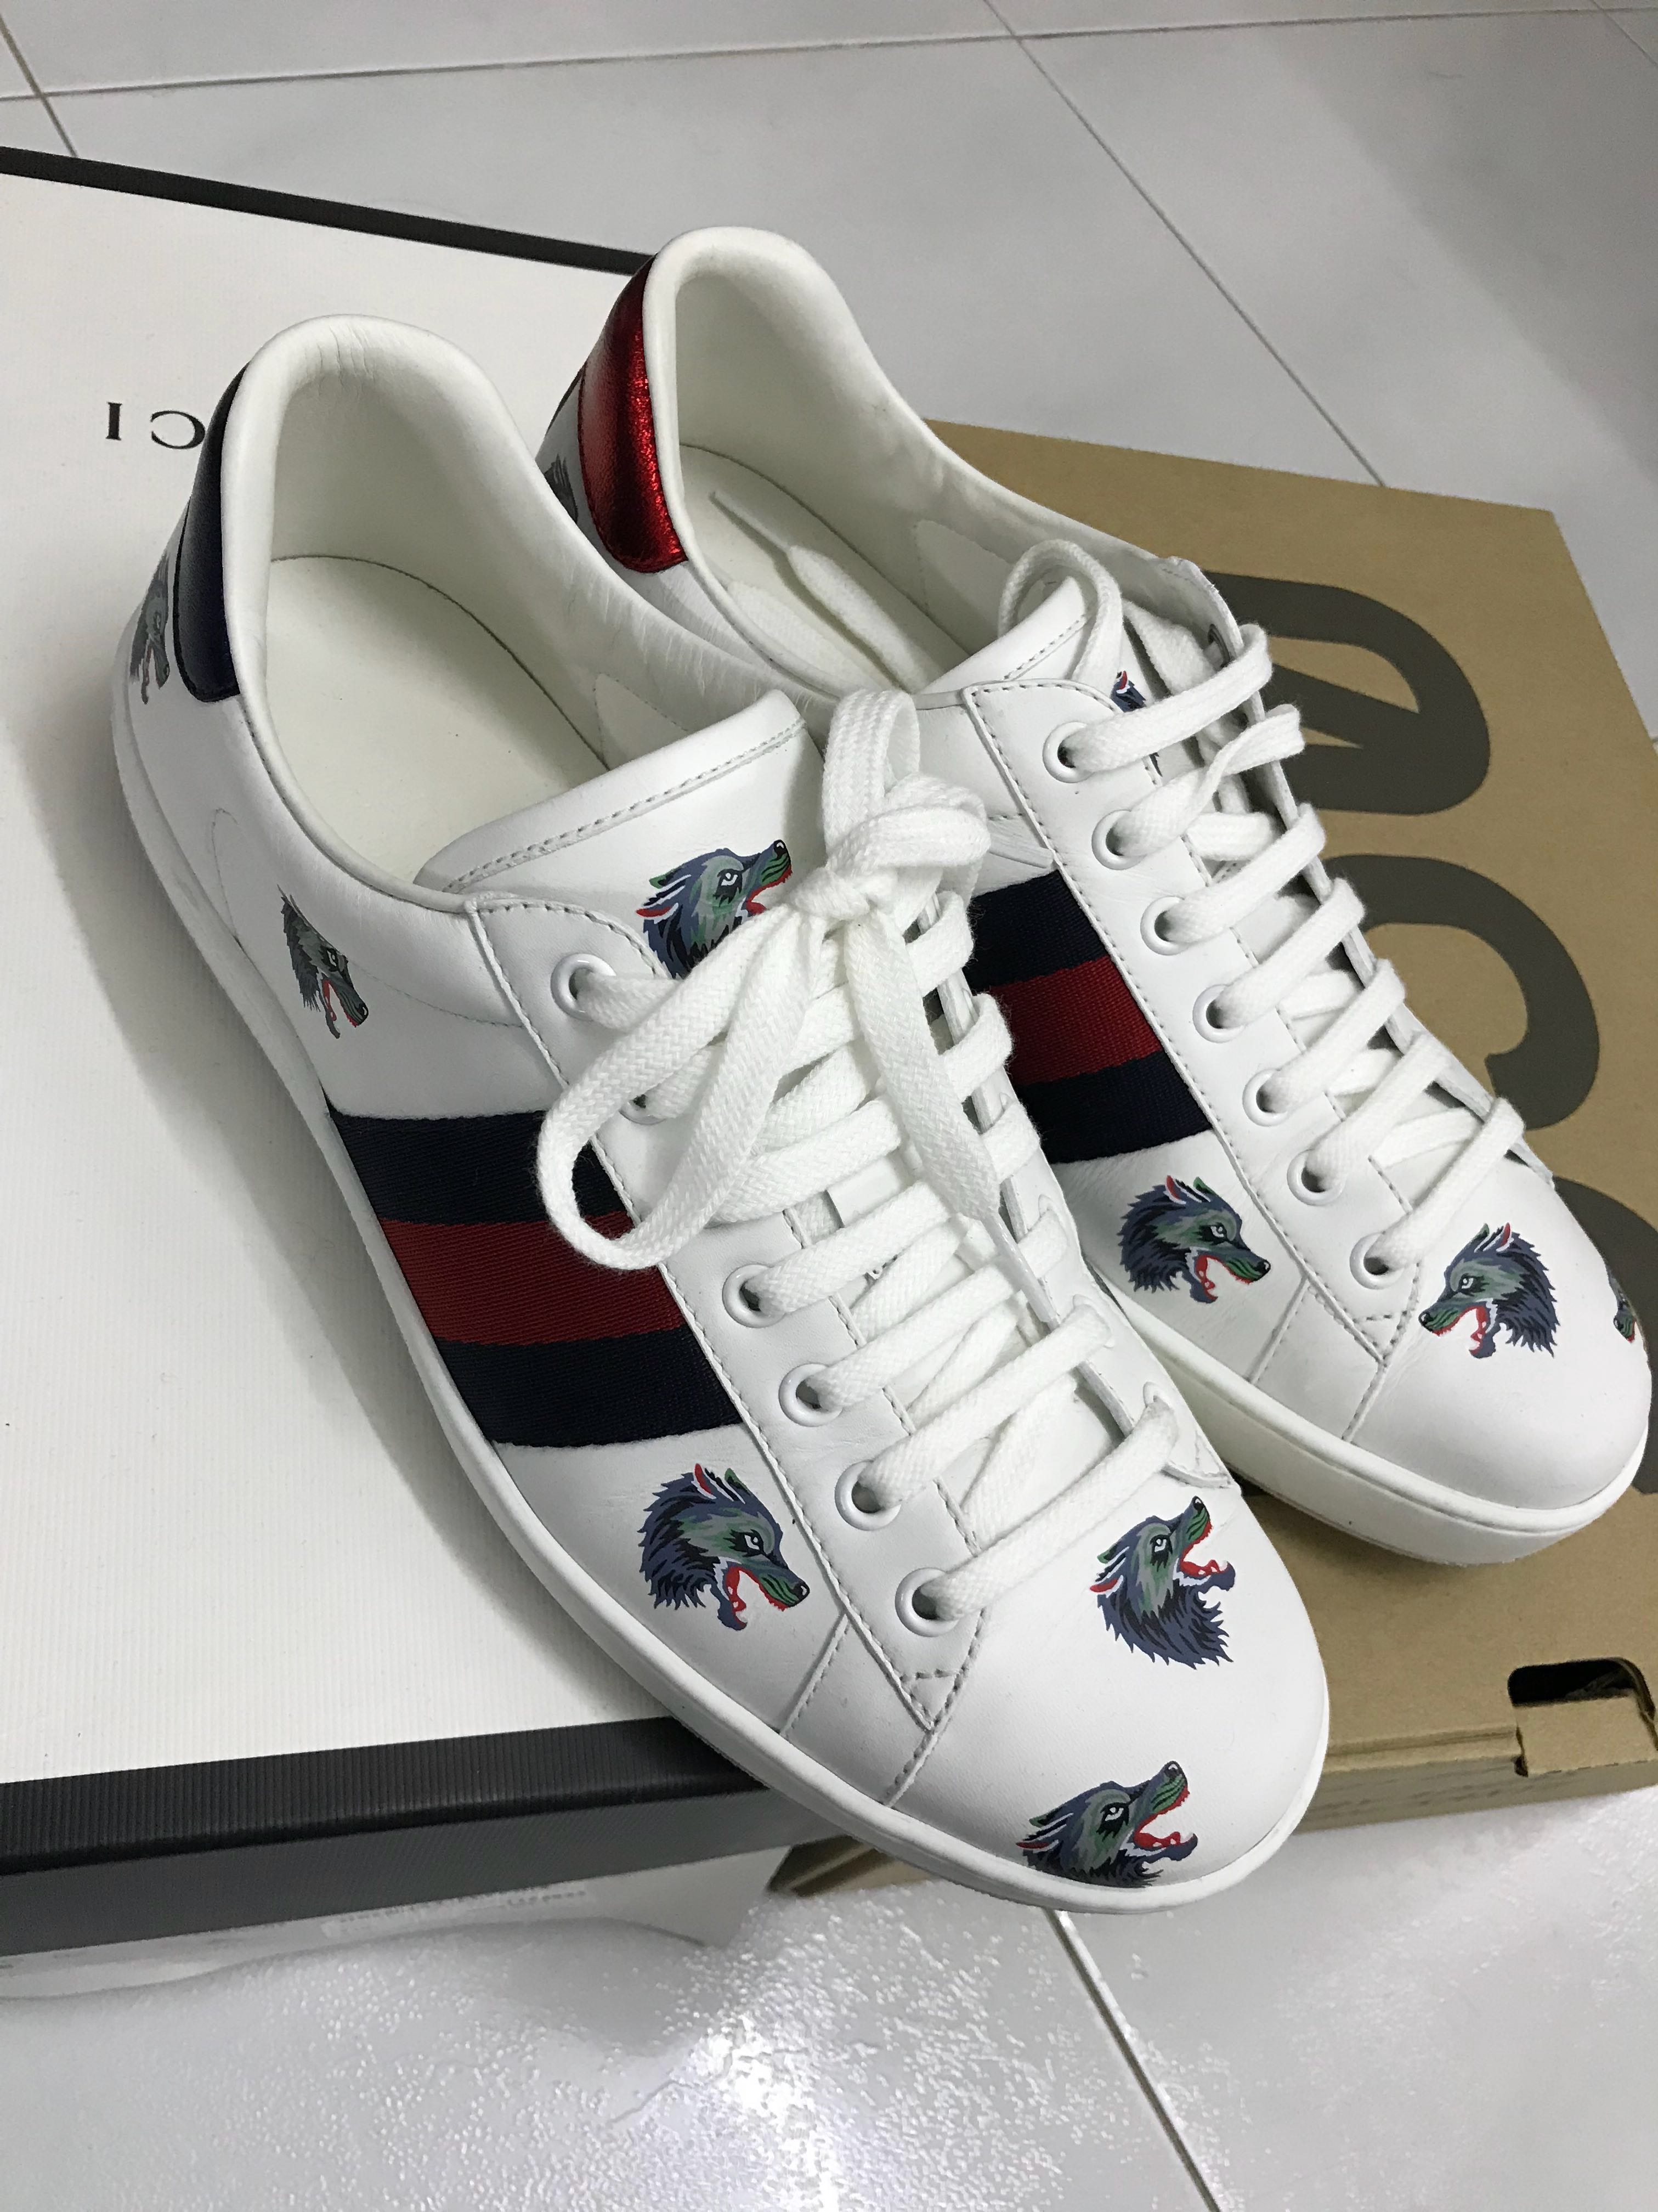 gucci sneakers wolf, OFF 71%,www 